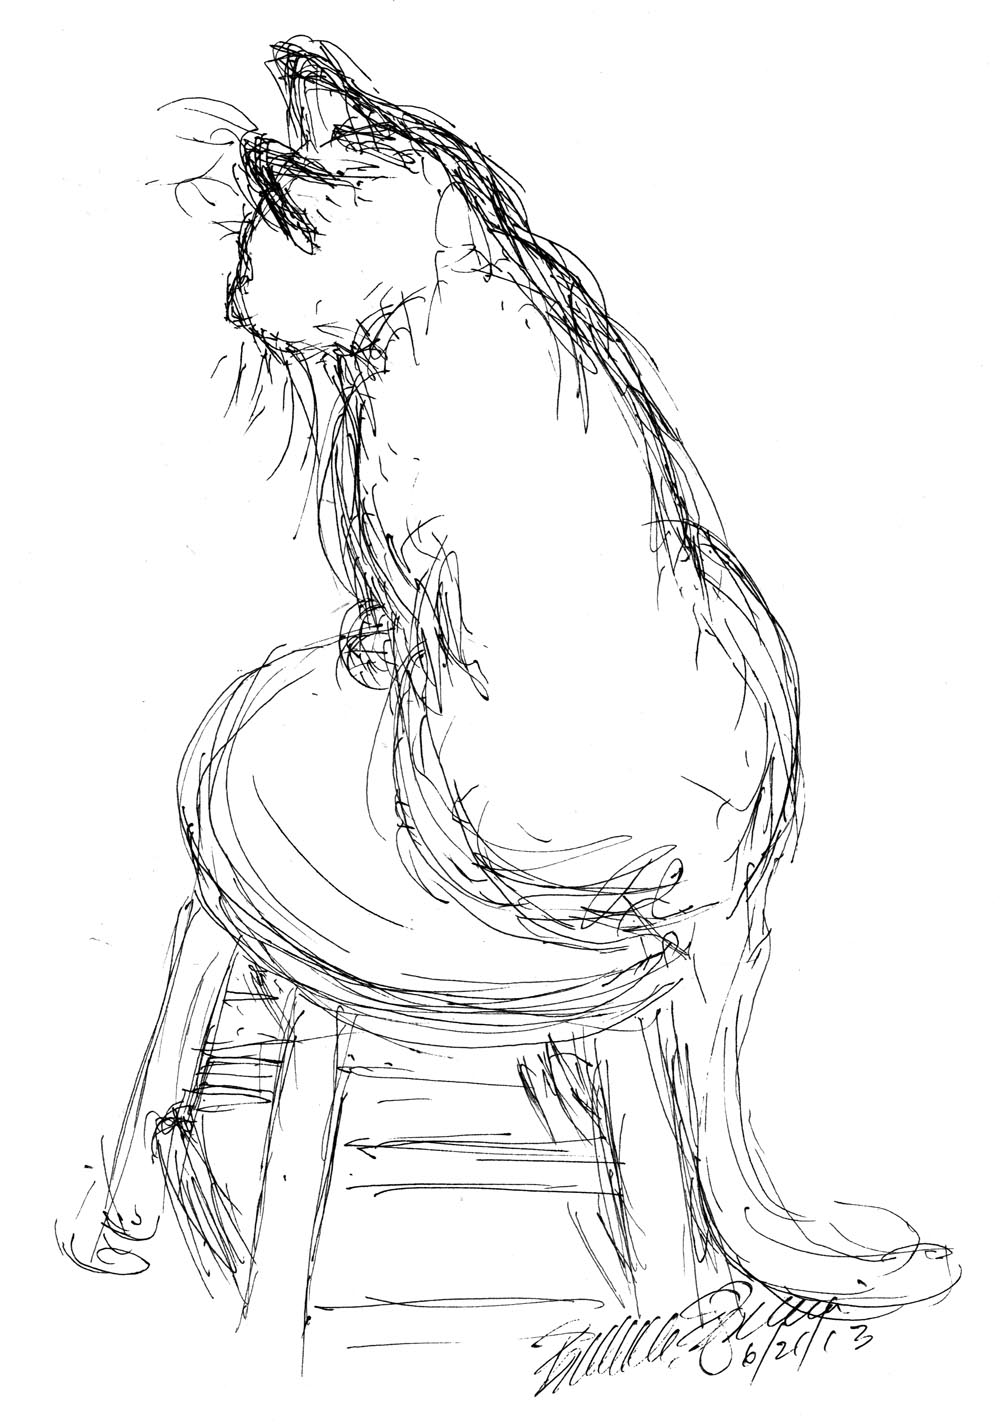 ink sketch of cat on stool